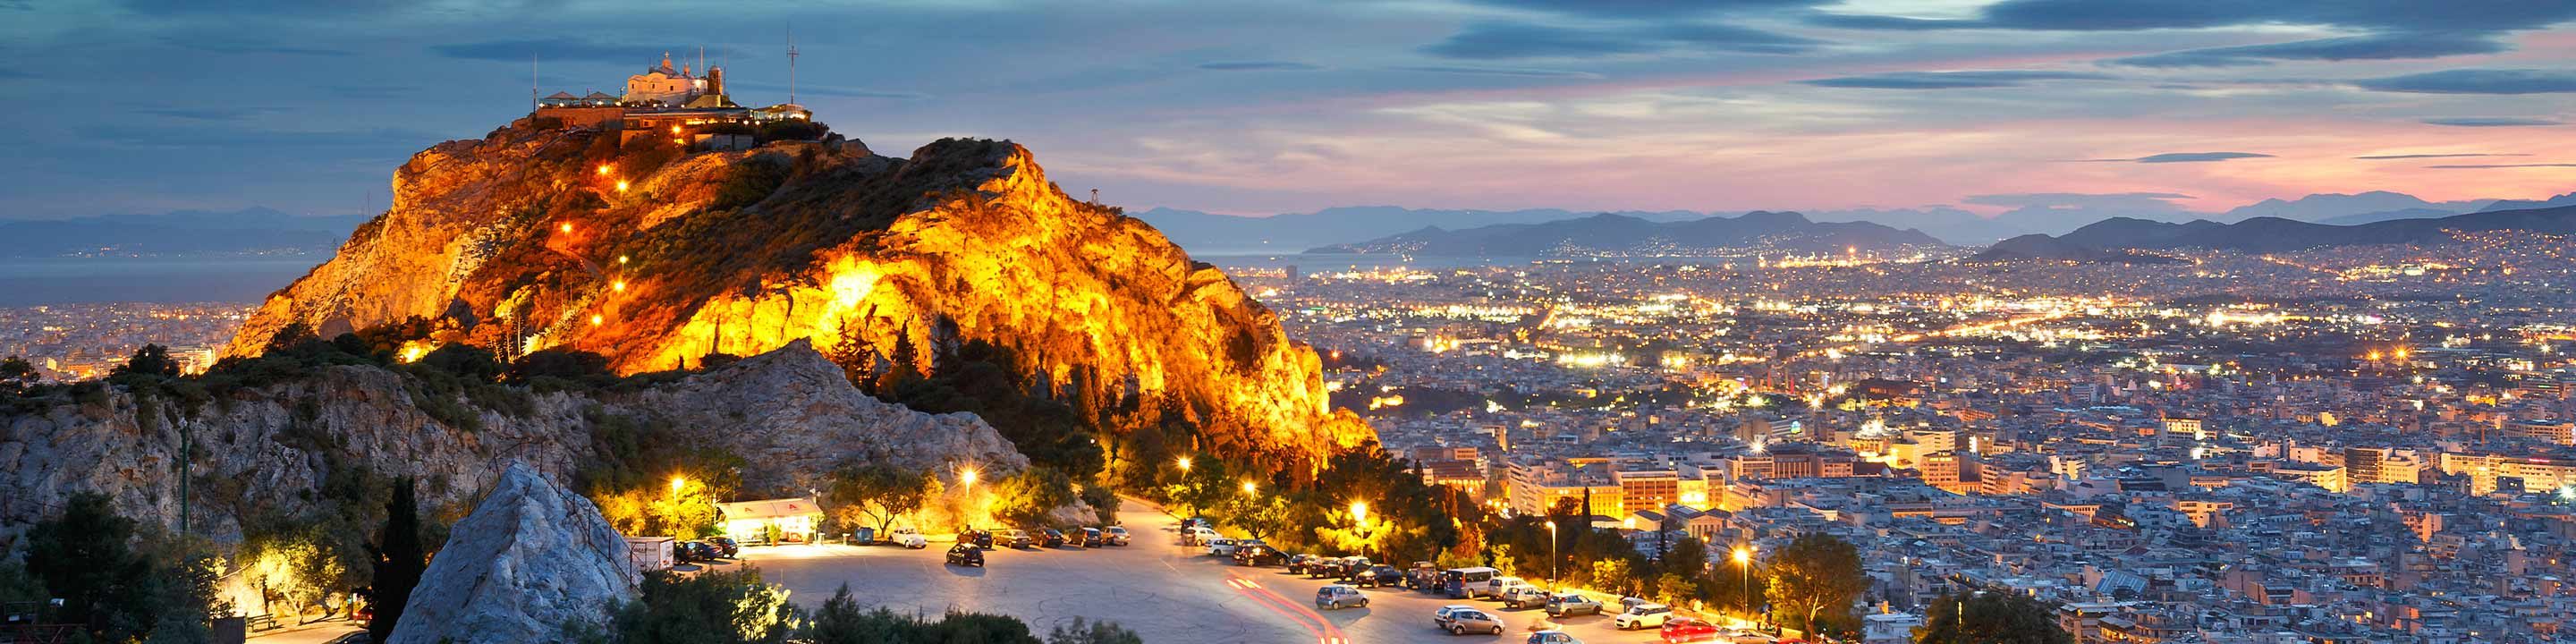  Lycabettus Hill in Athens